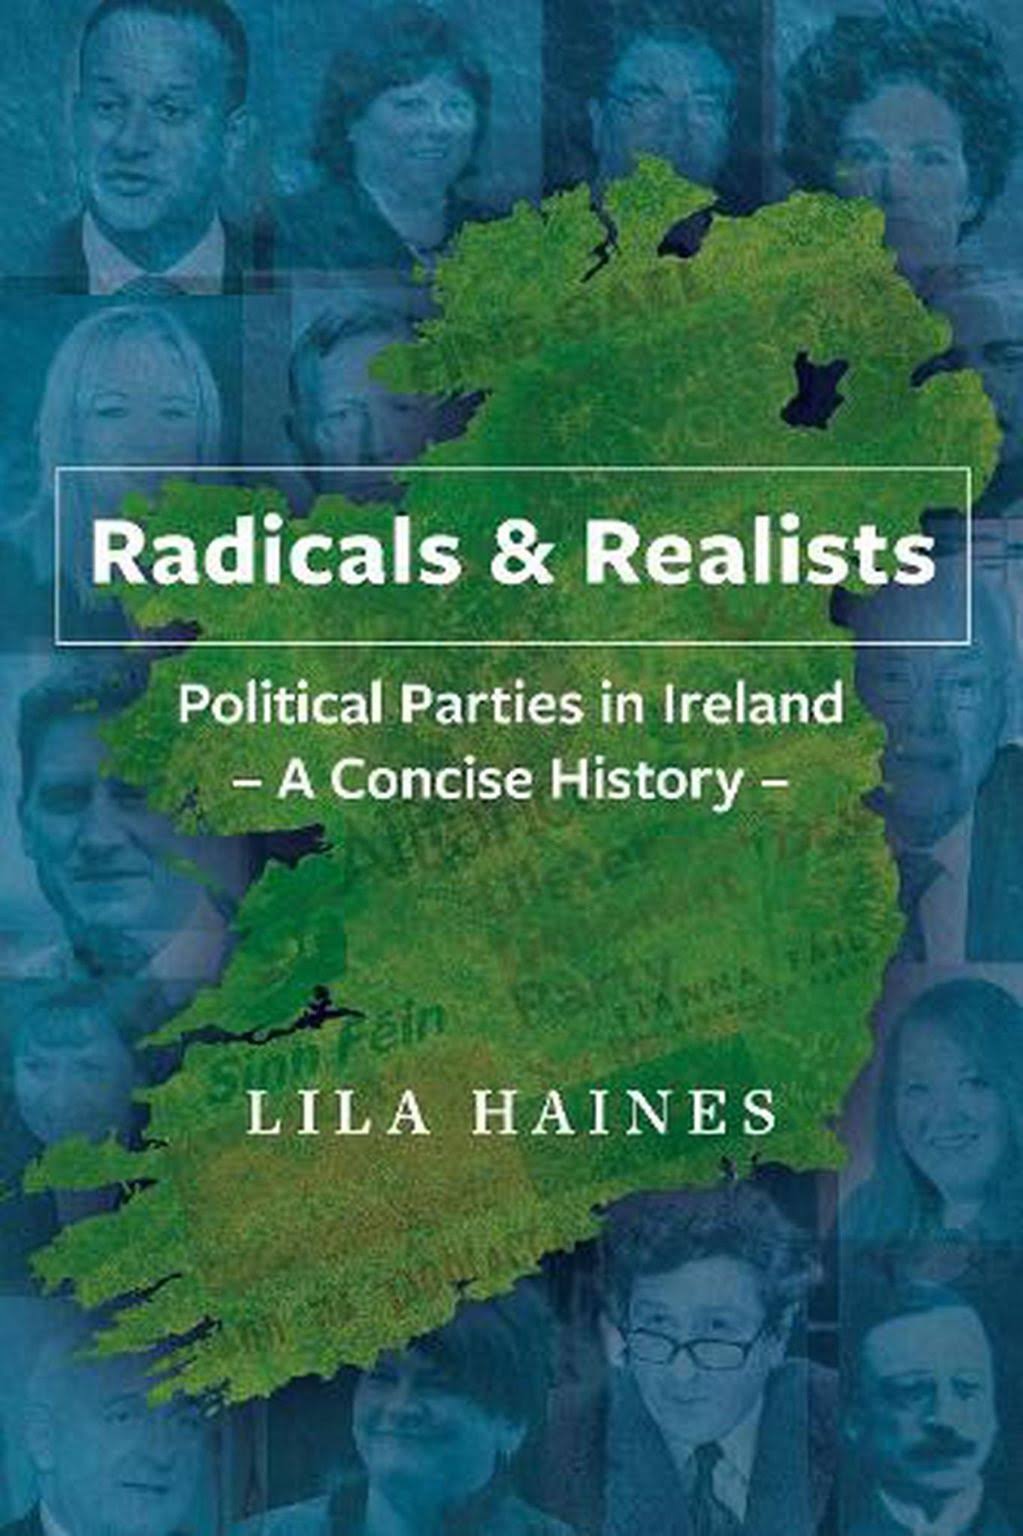 The political parties of Ireland